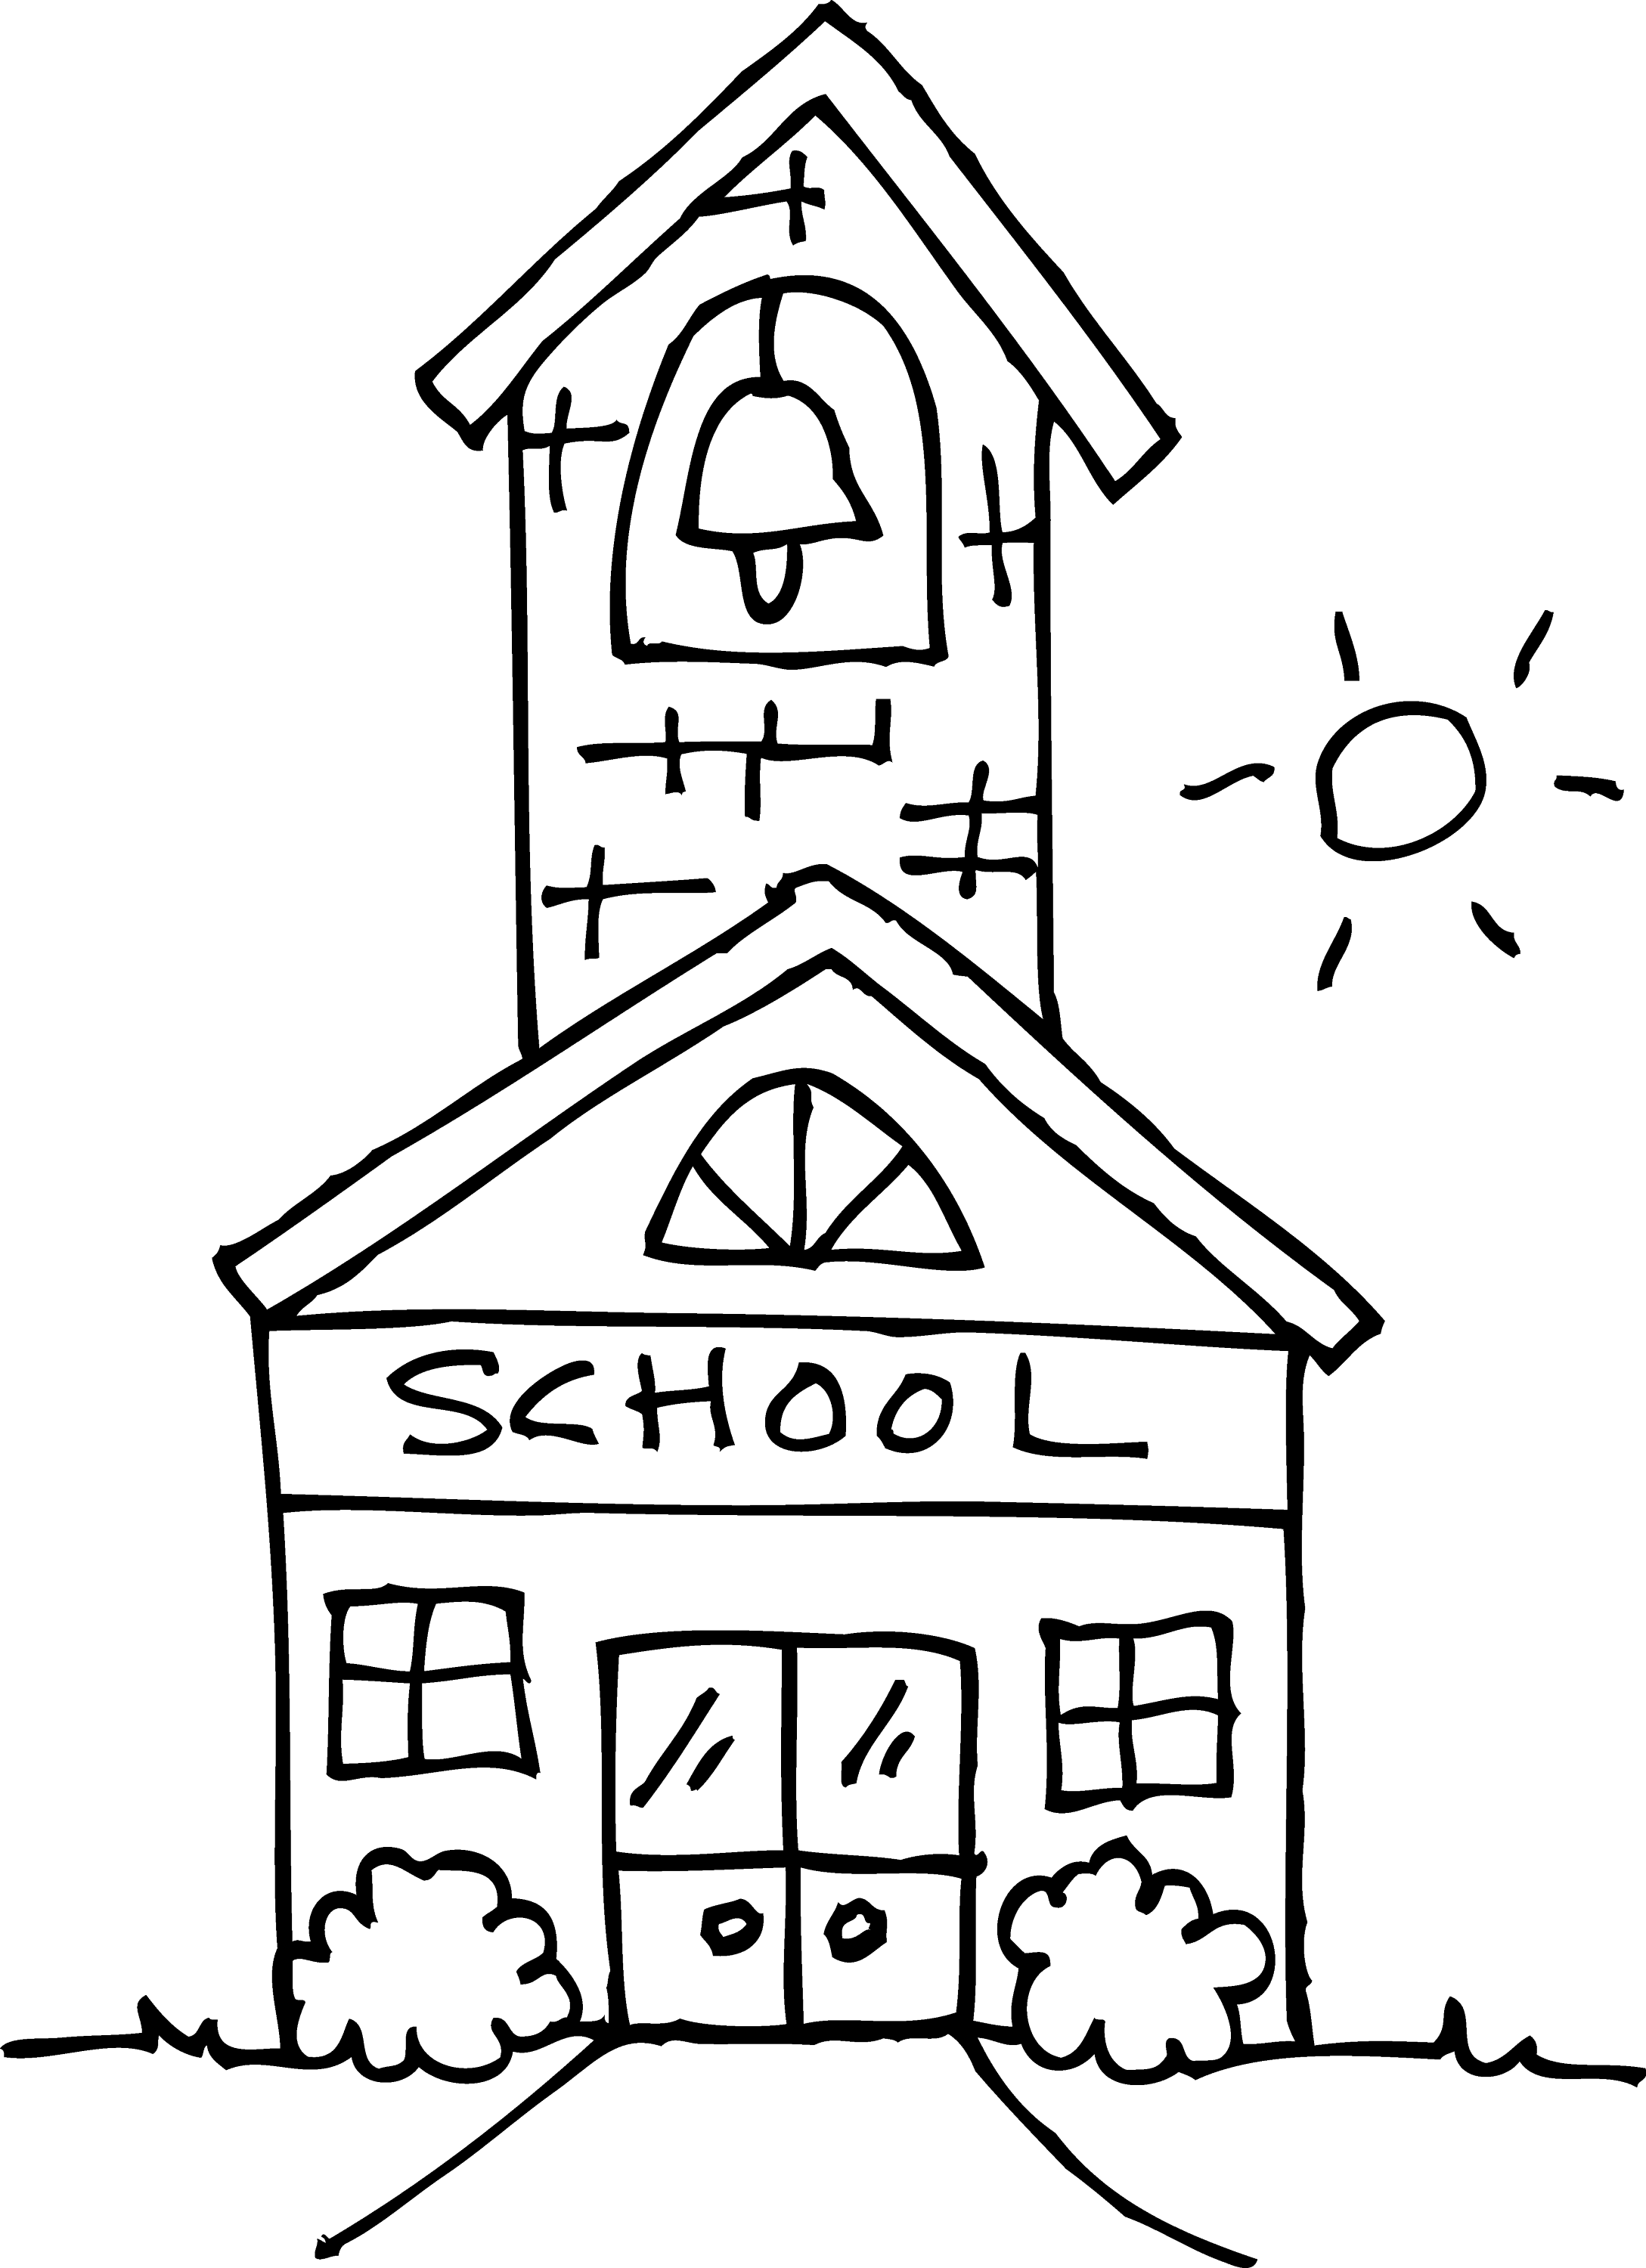 free education clipart black and white - photo #23